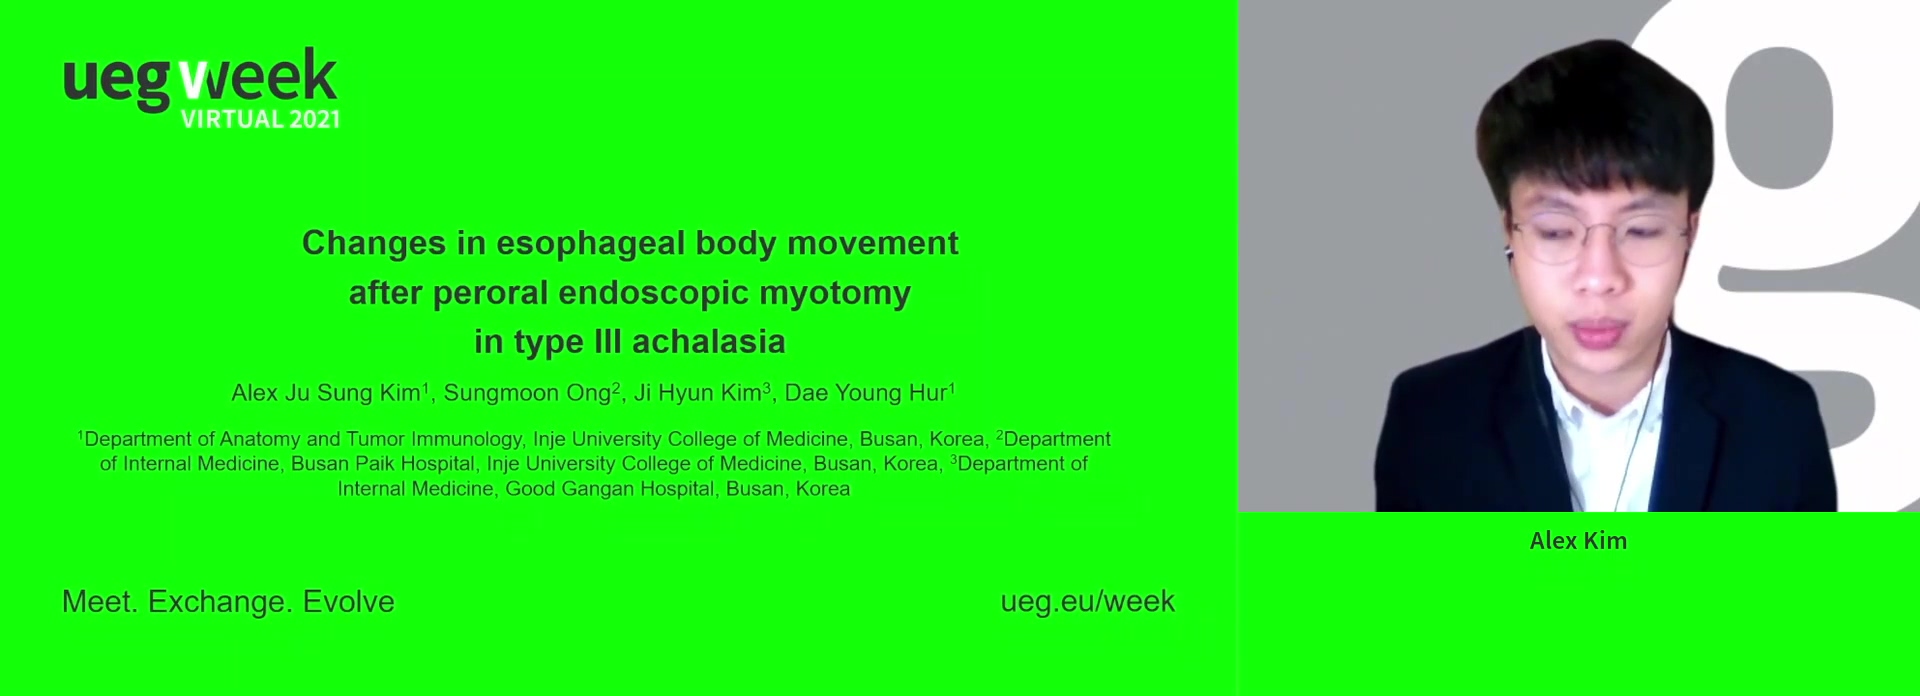 CHANGES IN ESOPHAGEAL BODY MOVEMENT AFTER PERORAL ENDOSCOPIC MYOTOMY IN TYPE III ACHALASIA